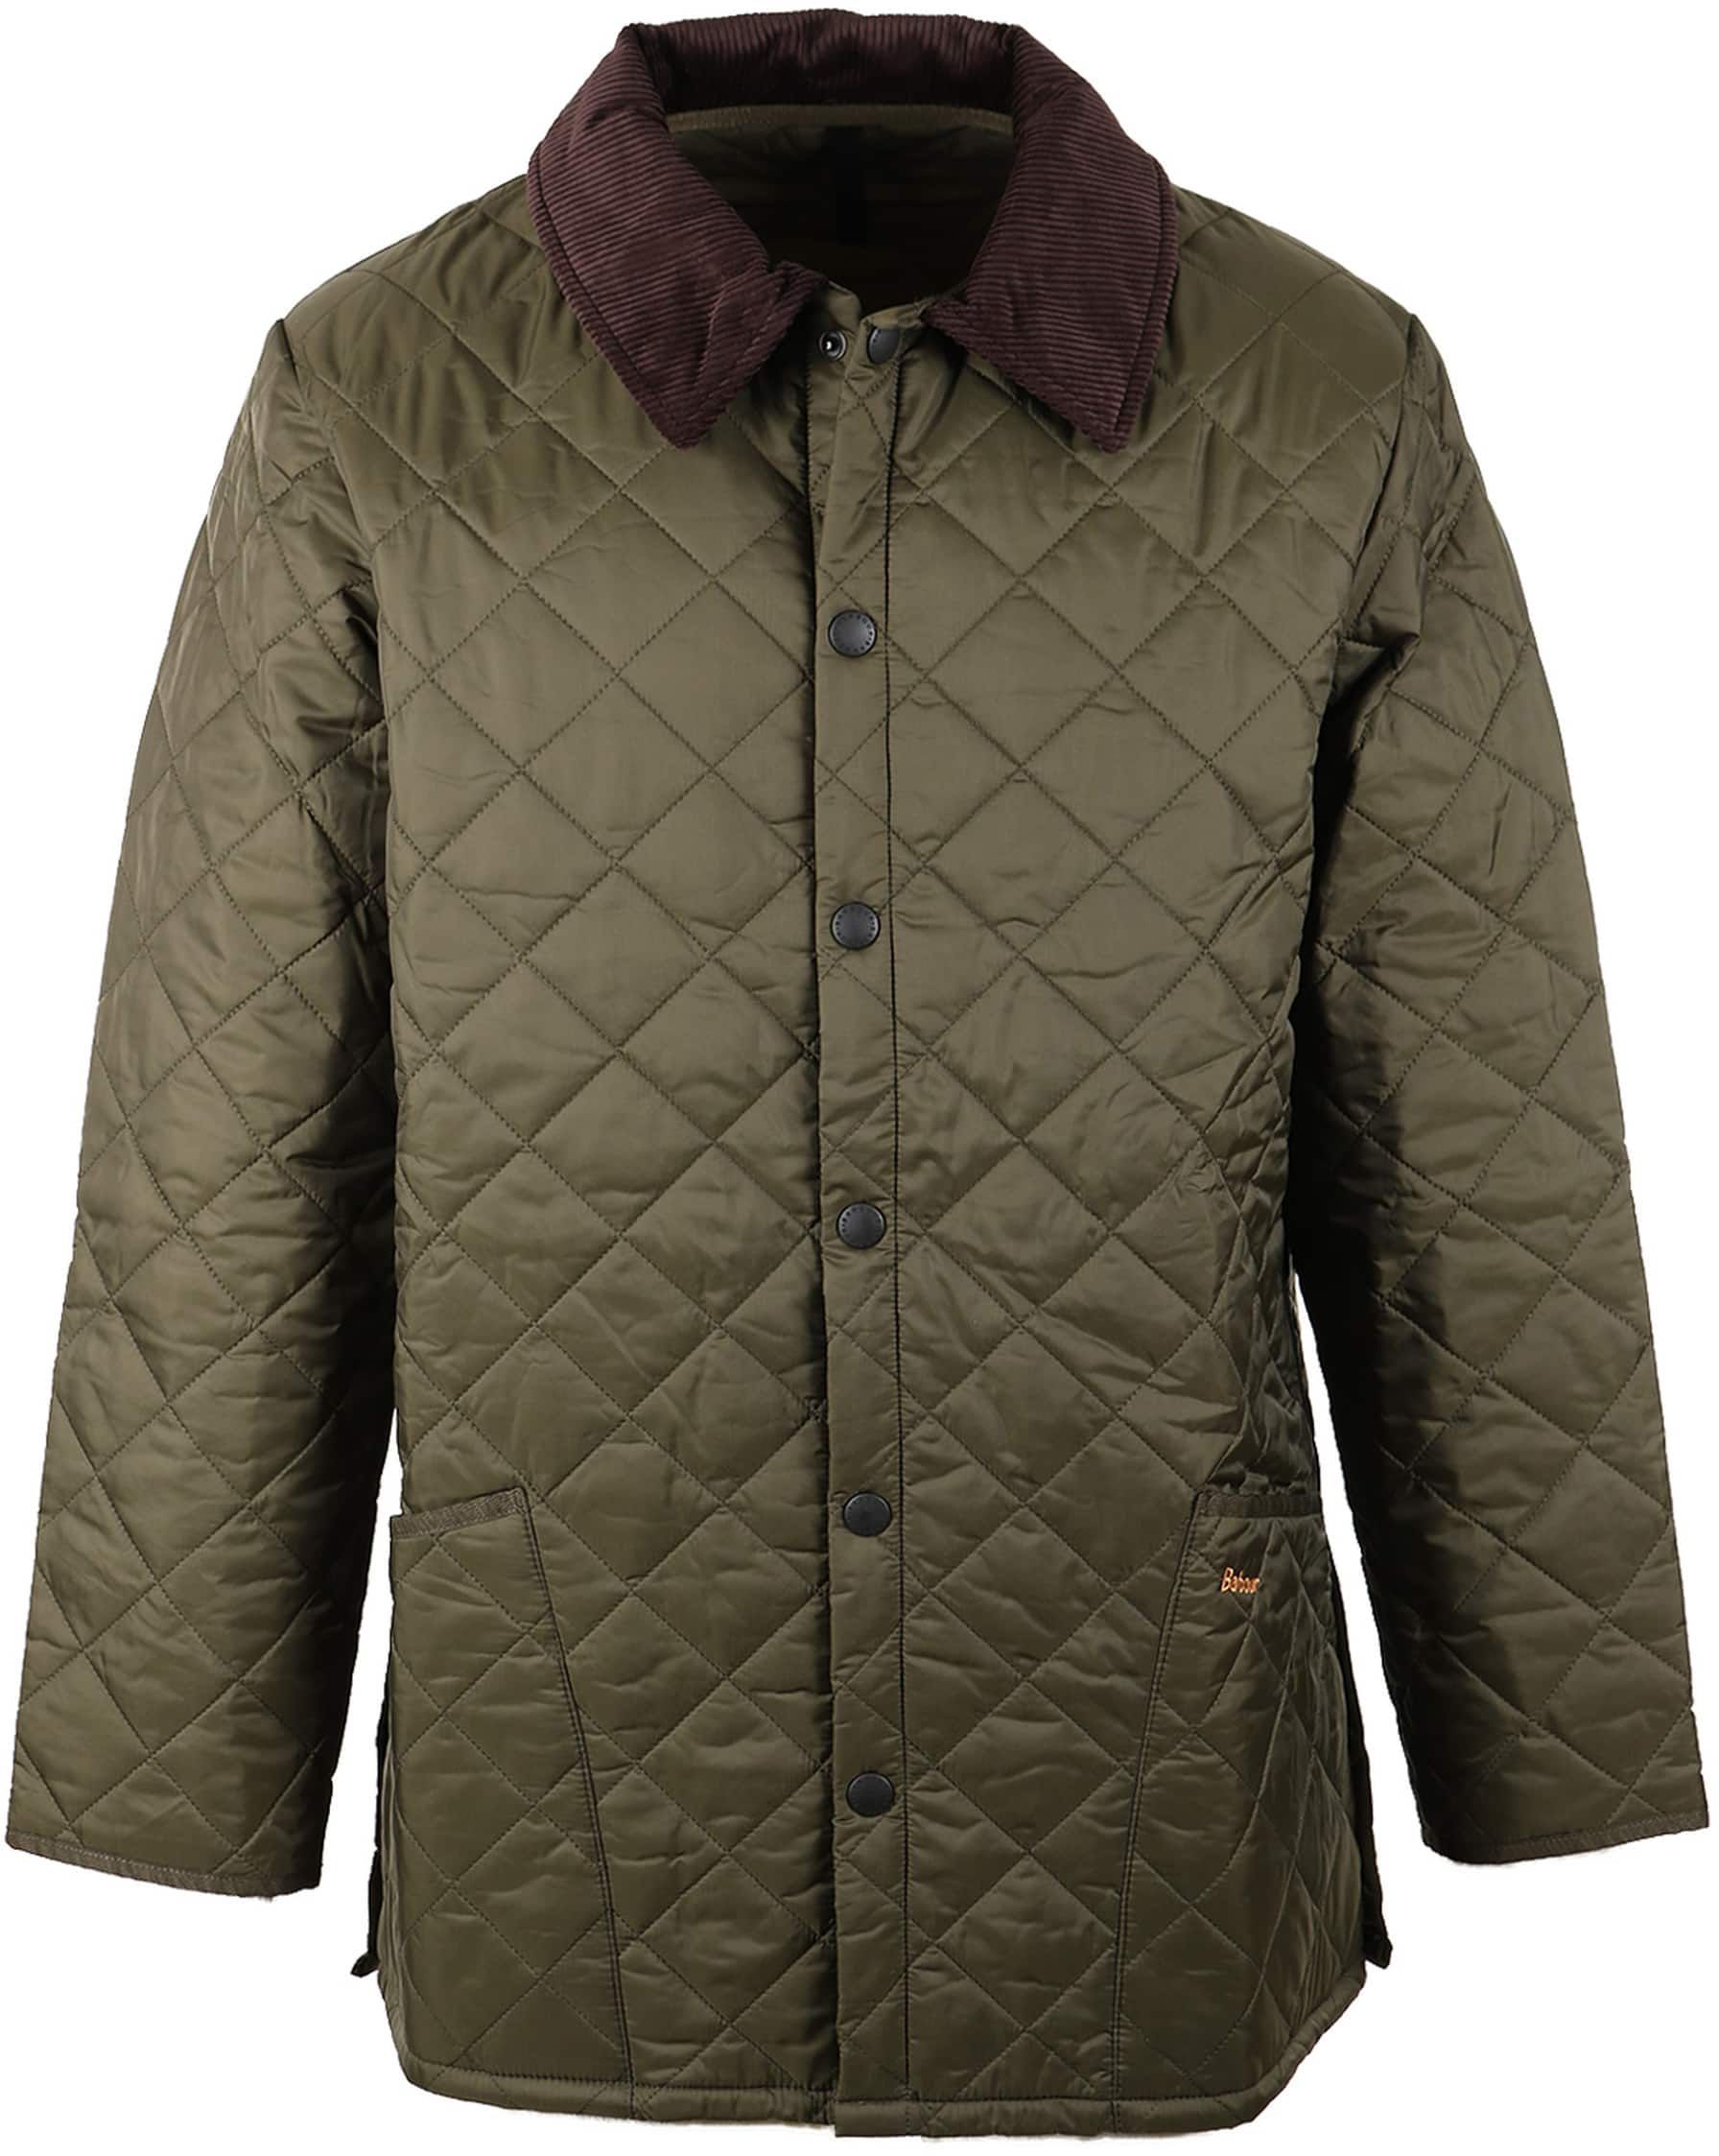 Barbour Liddesdale Quilt Green size M